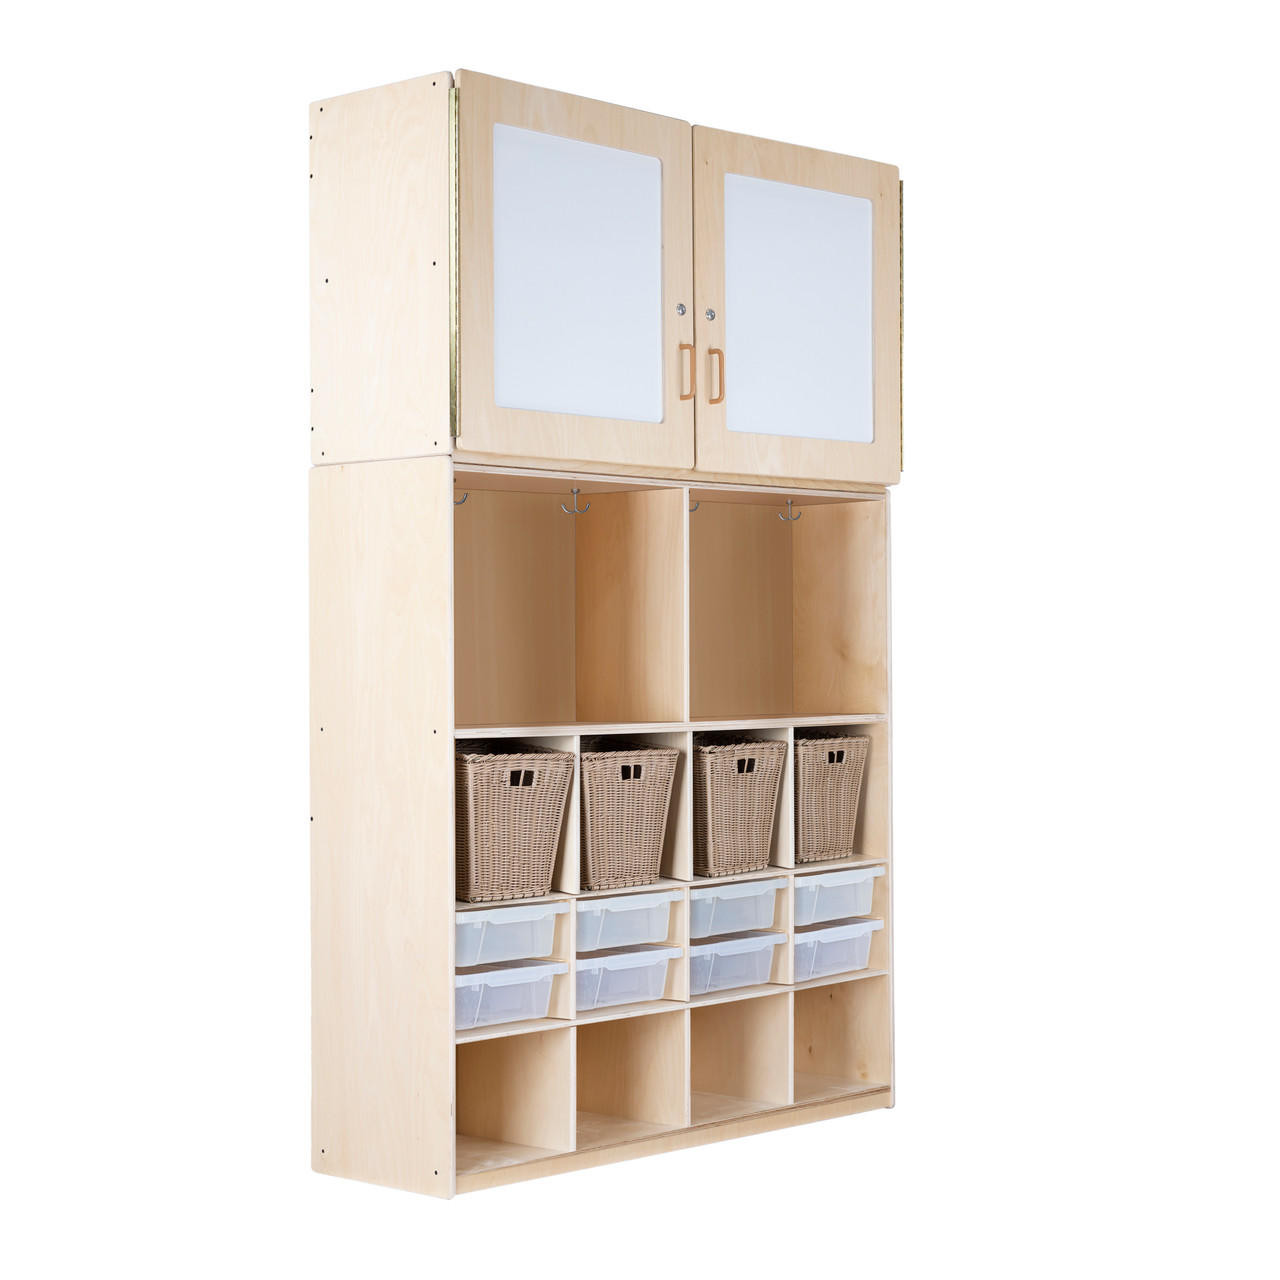 The Classroom Organizer with Locking Cabinet and Two Undivided